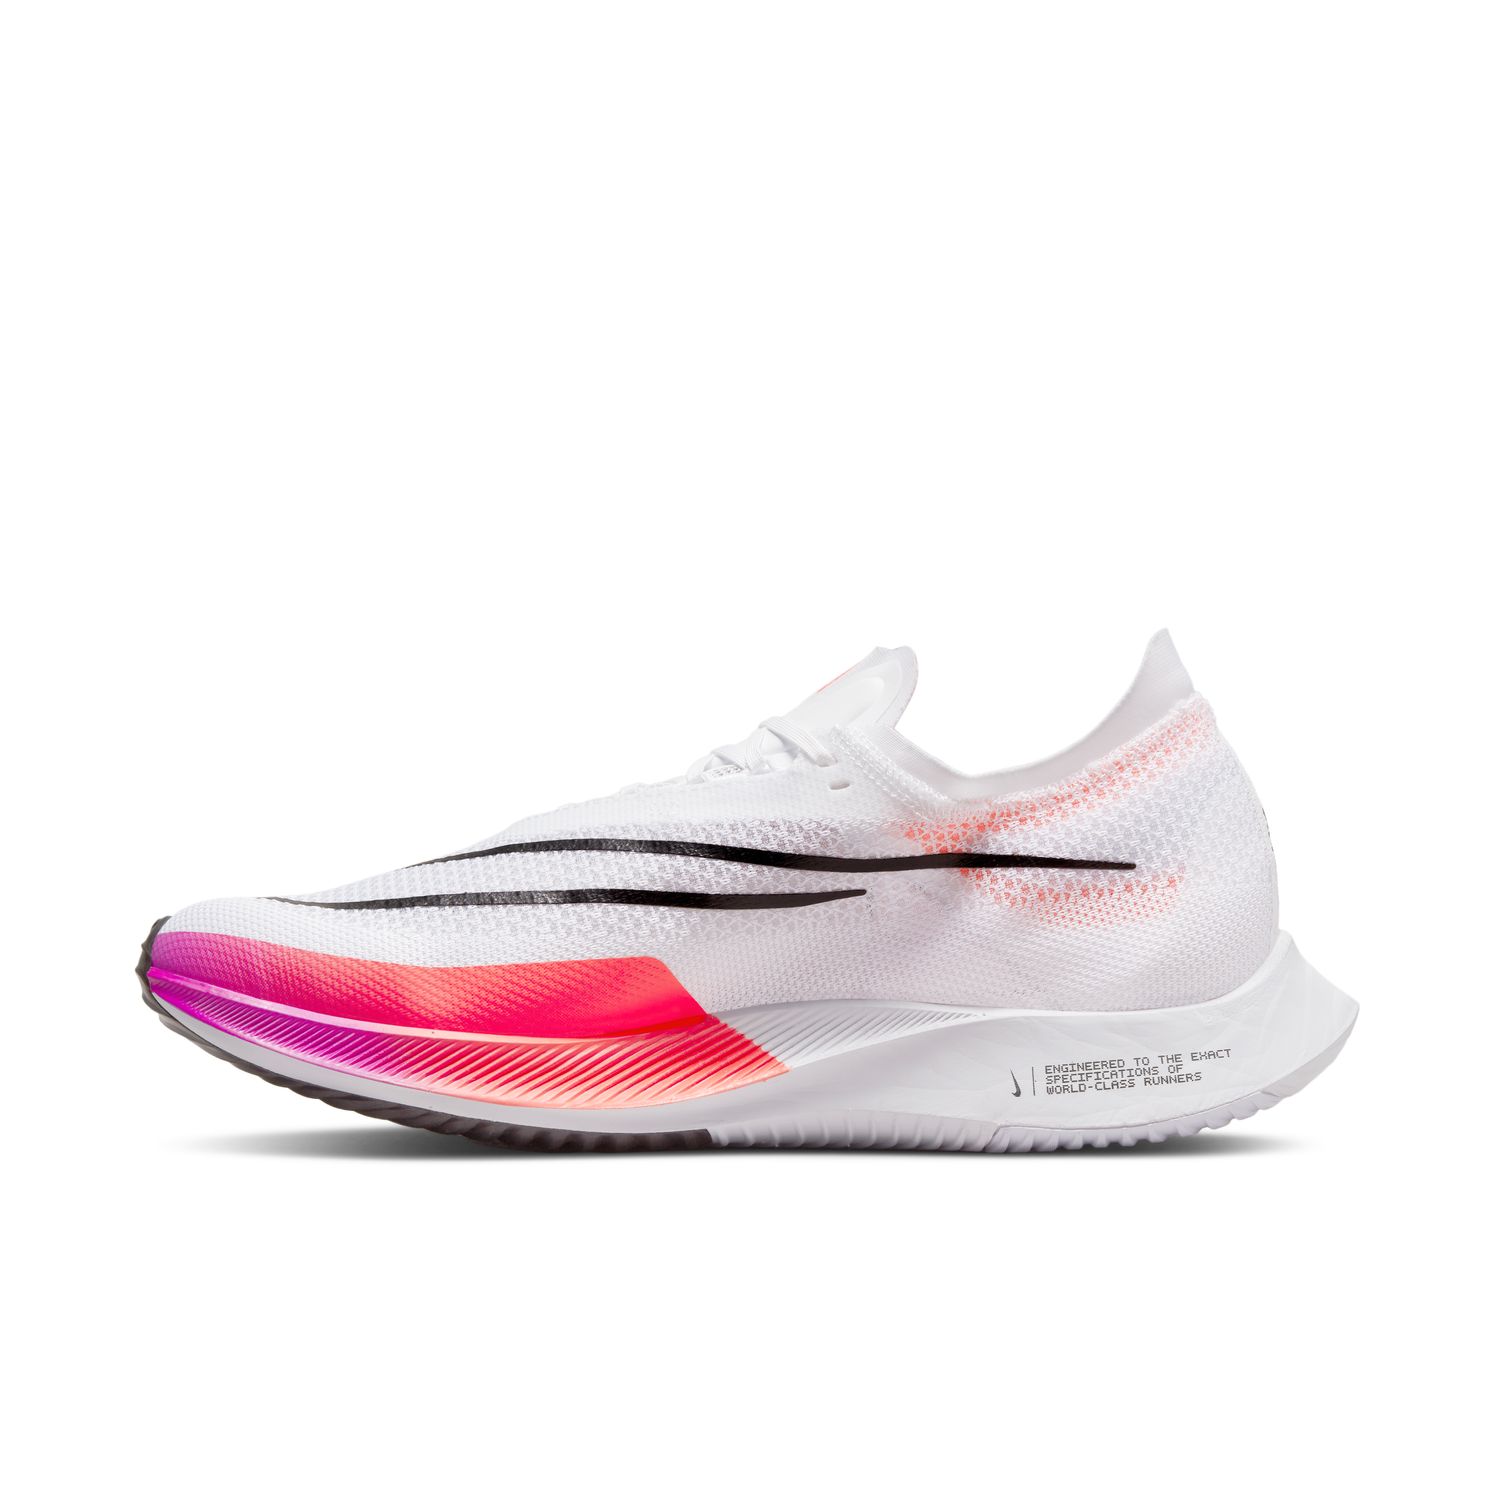 Nike ZoomX Streakfly - The Running Company - Running Shoe Specialists